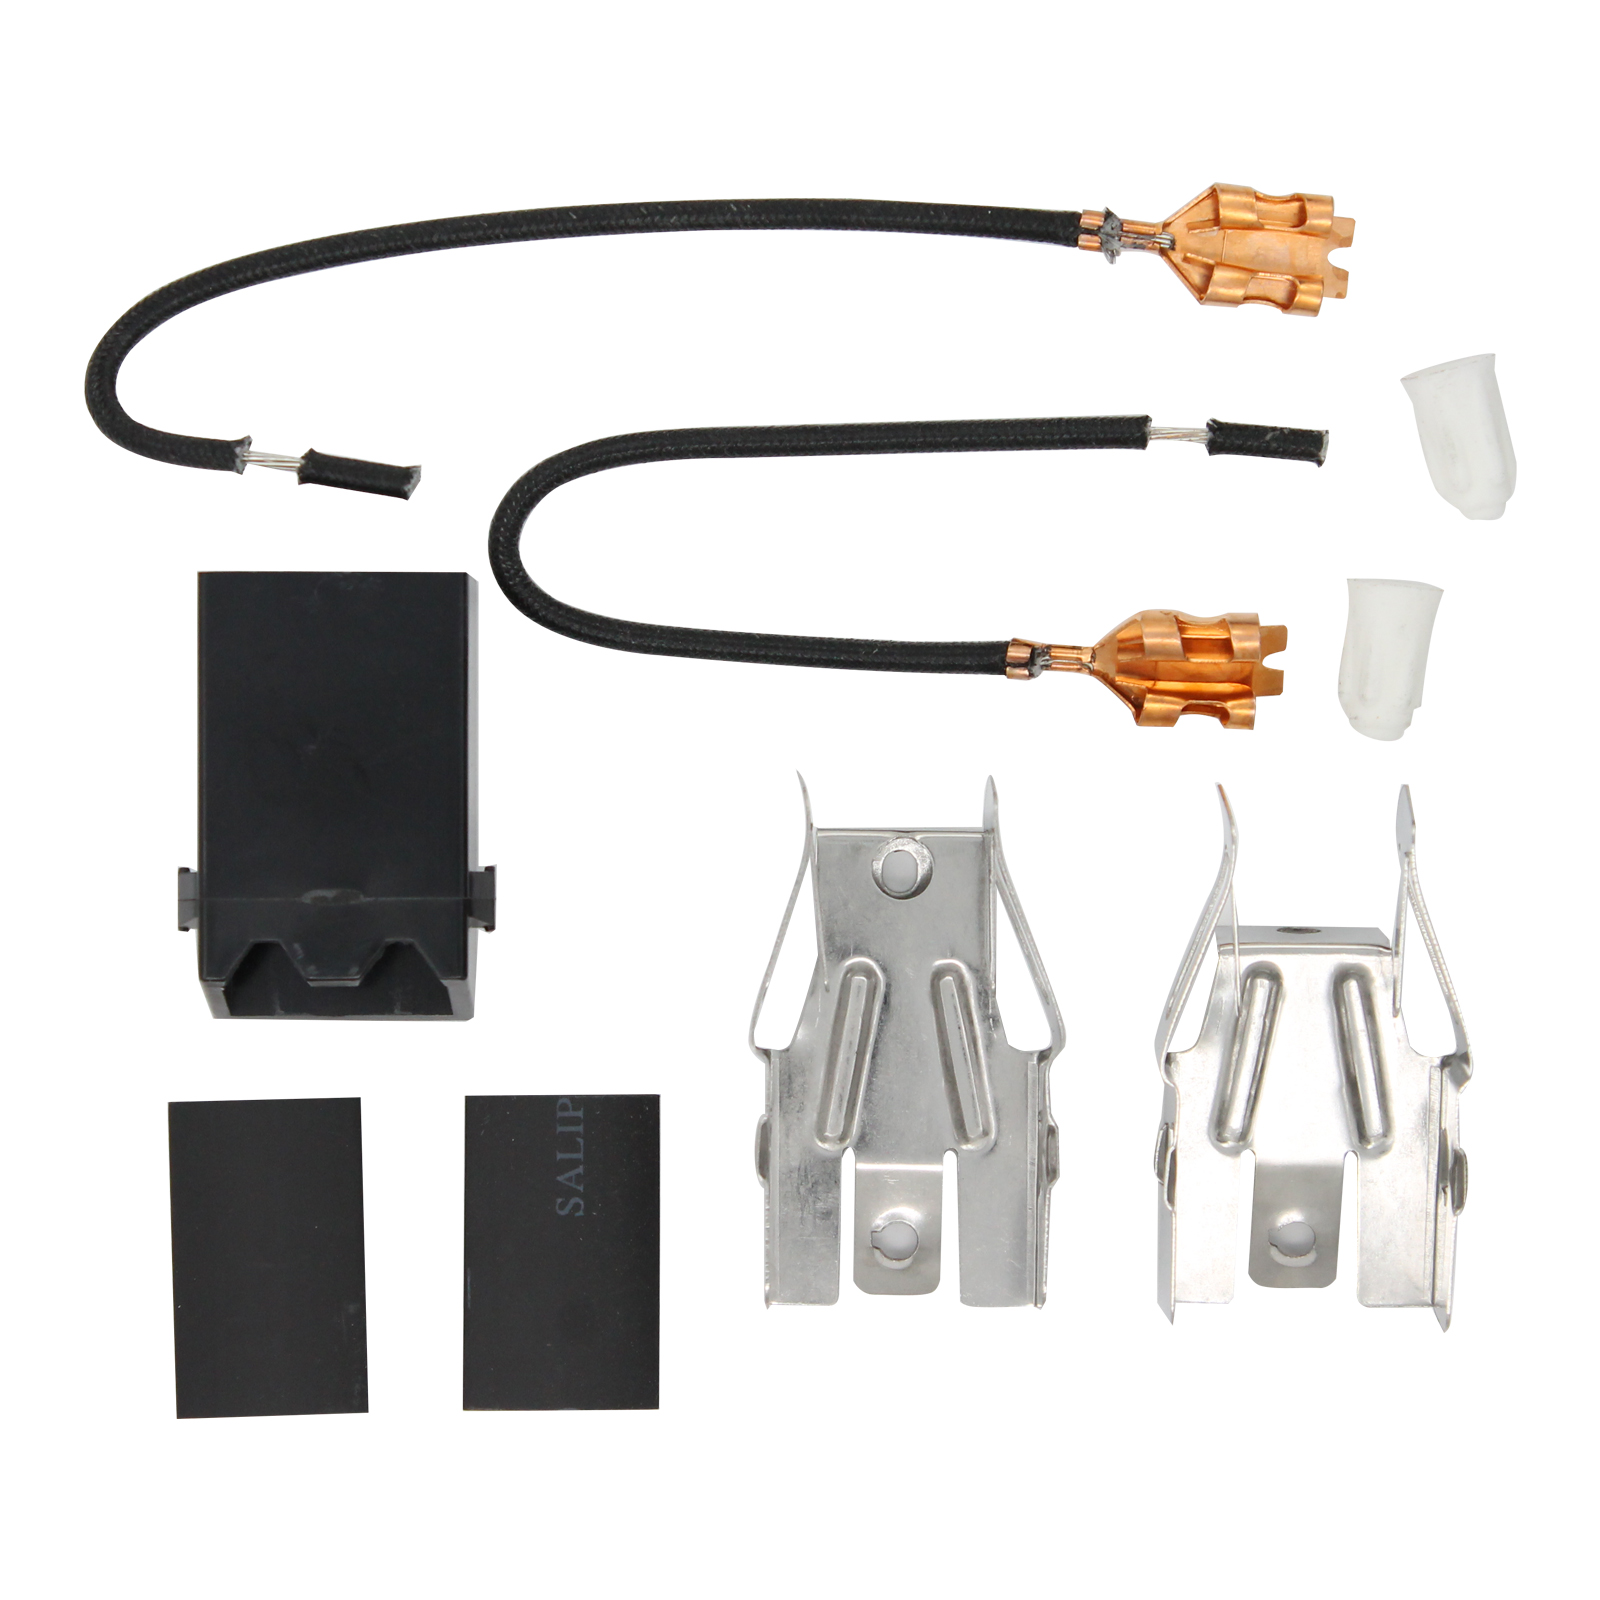 330031 Top Burner Receptacle Kit Replacement for Whirlpool RE960PXVN5 Range/Cooktop/Oven - Compatible with 330031 Range Burner Receptacle Kit - UpStart Components Brand - image 4 of 4